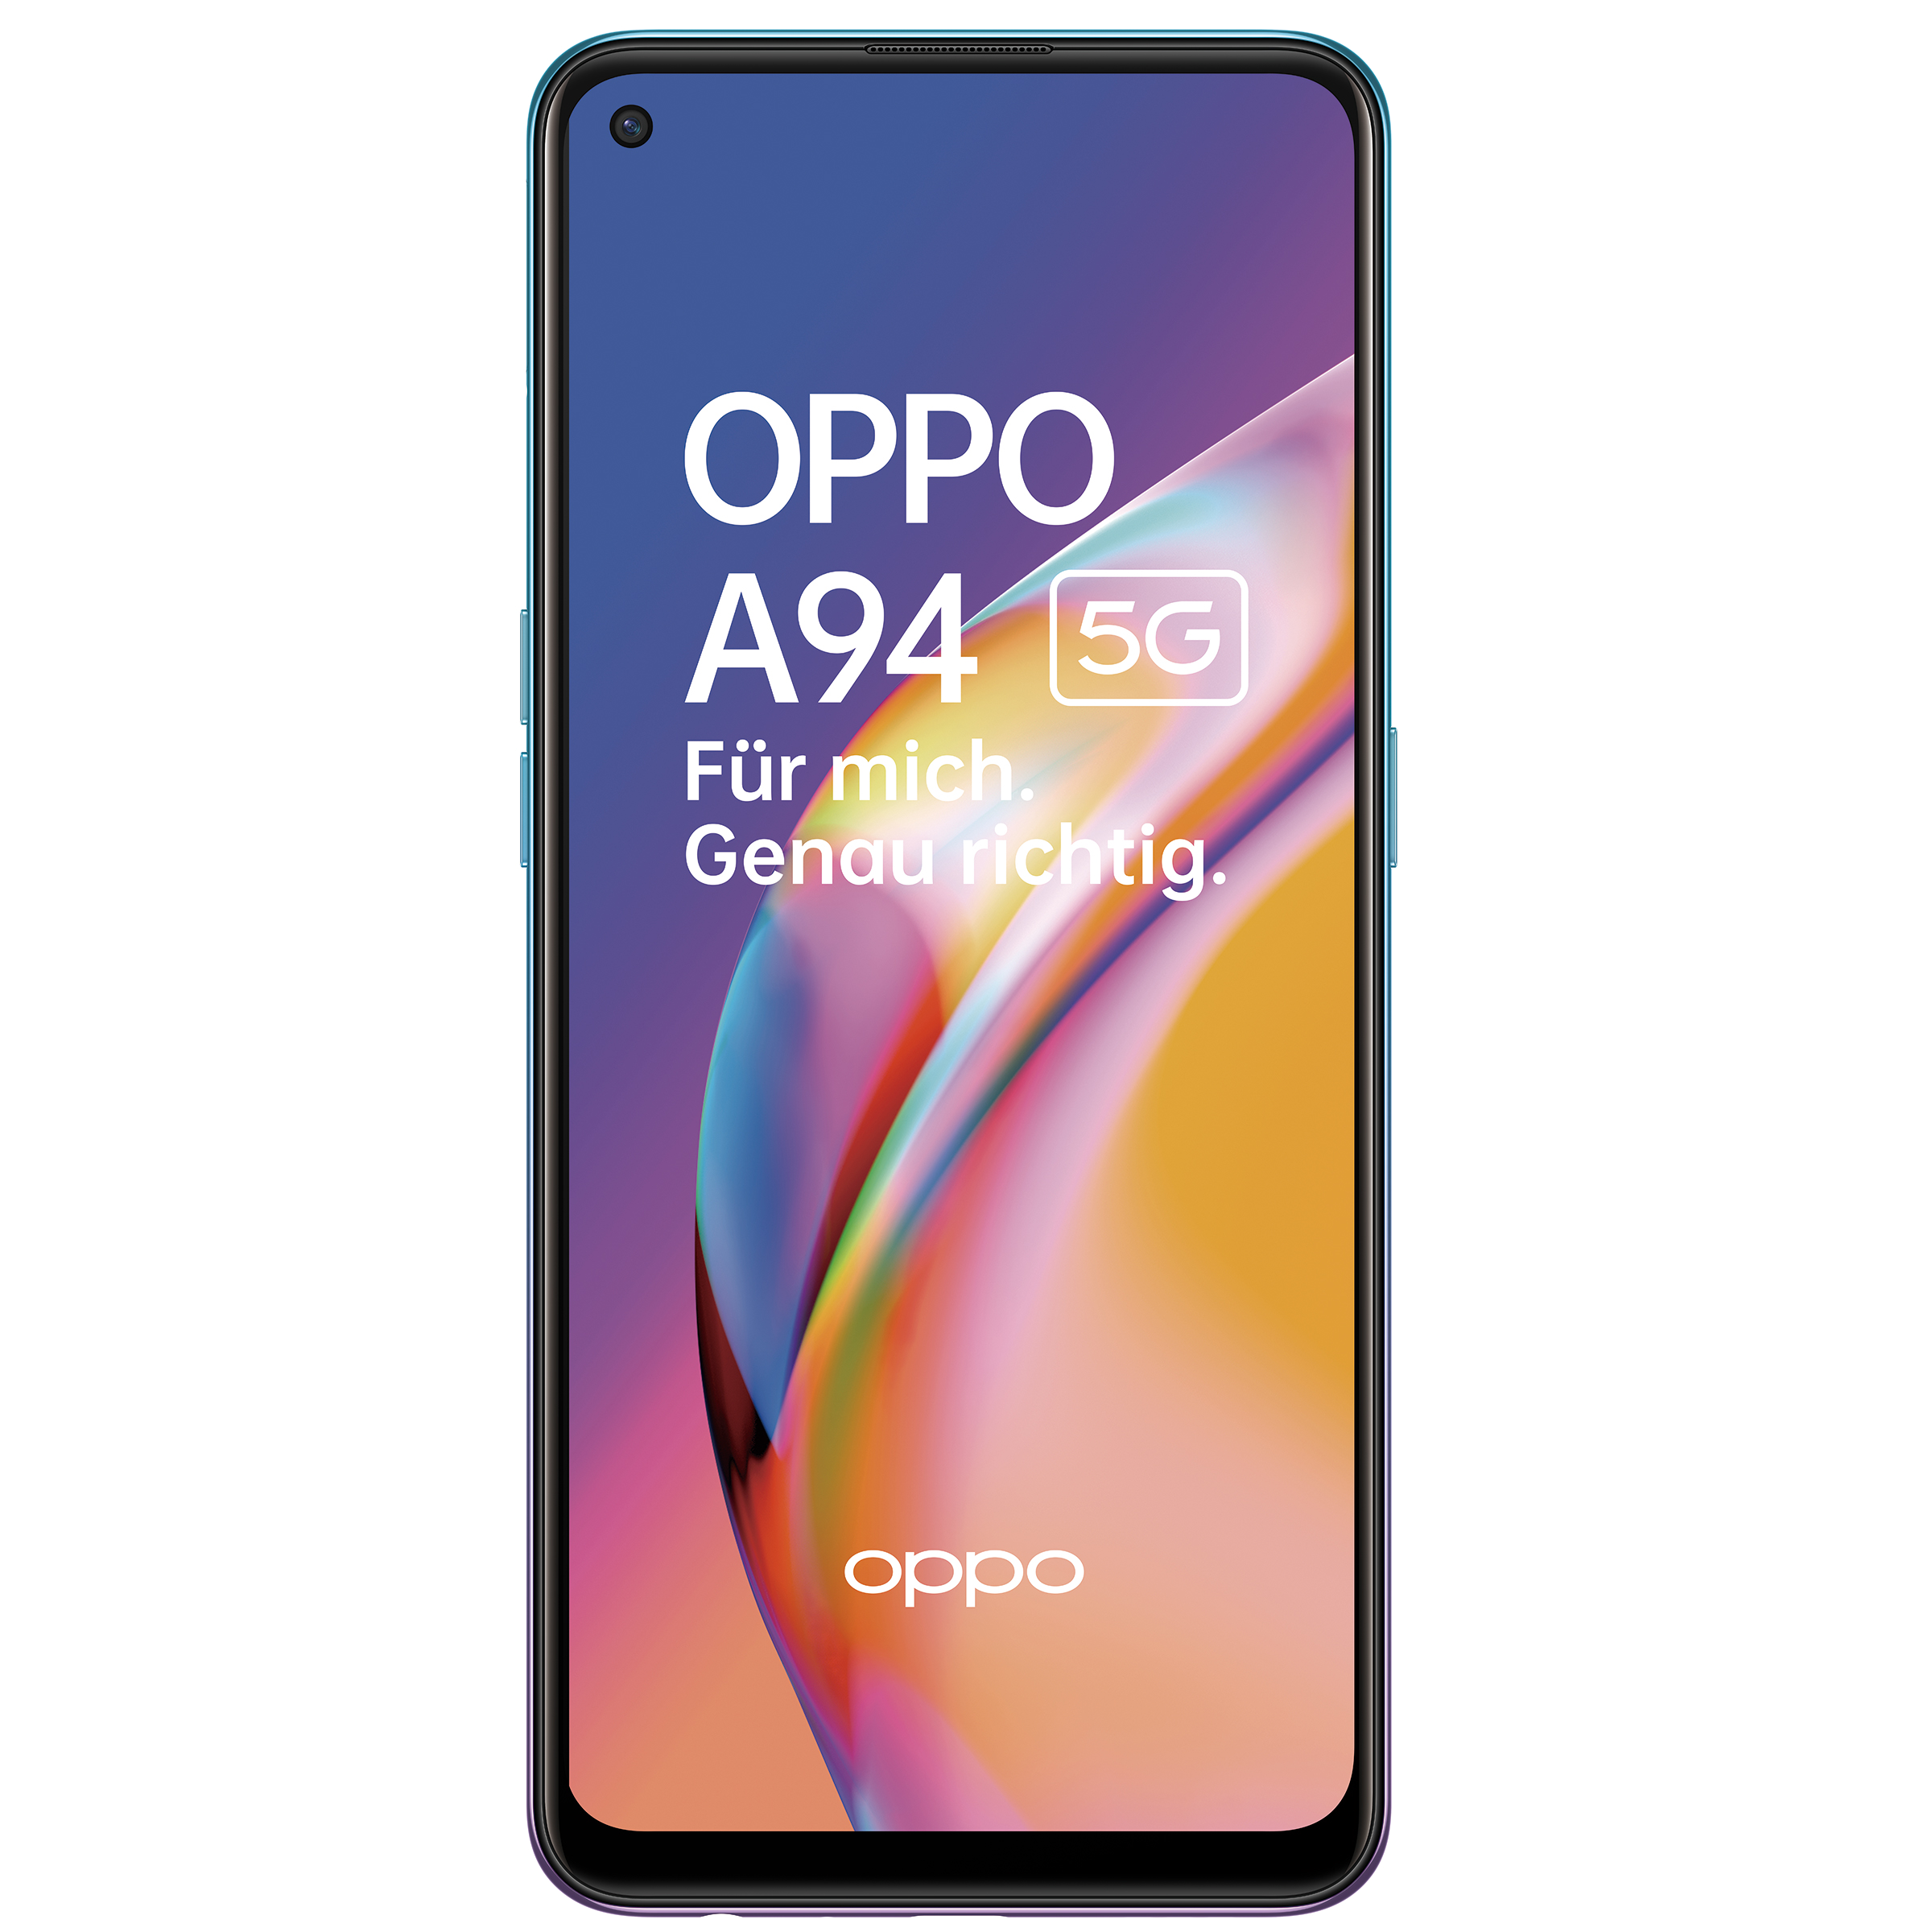 OPPO A94 5G and OPPO A54 5G specifications, renders, and pricing